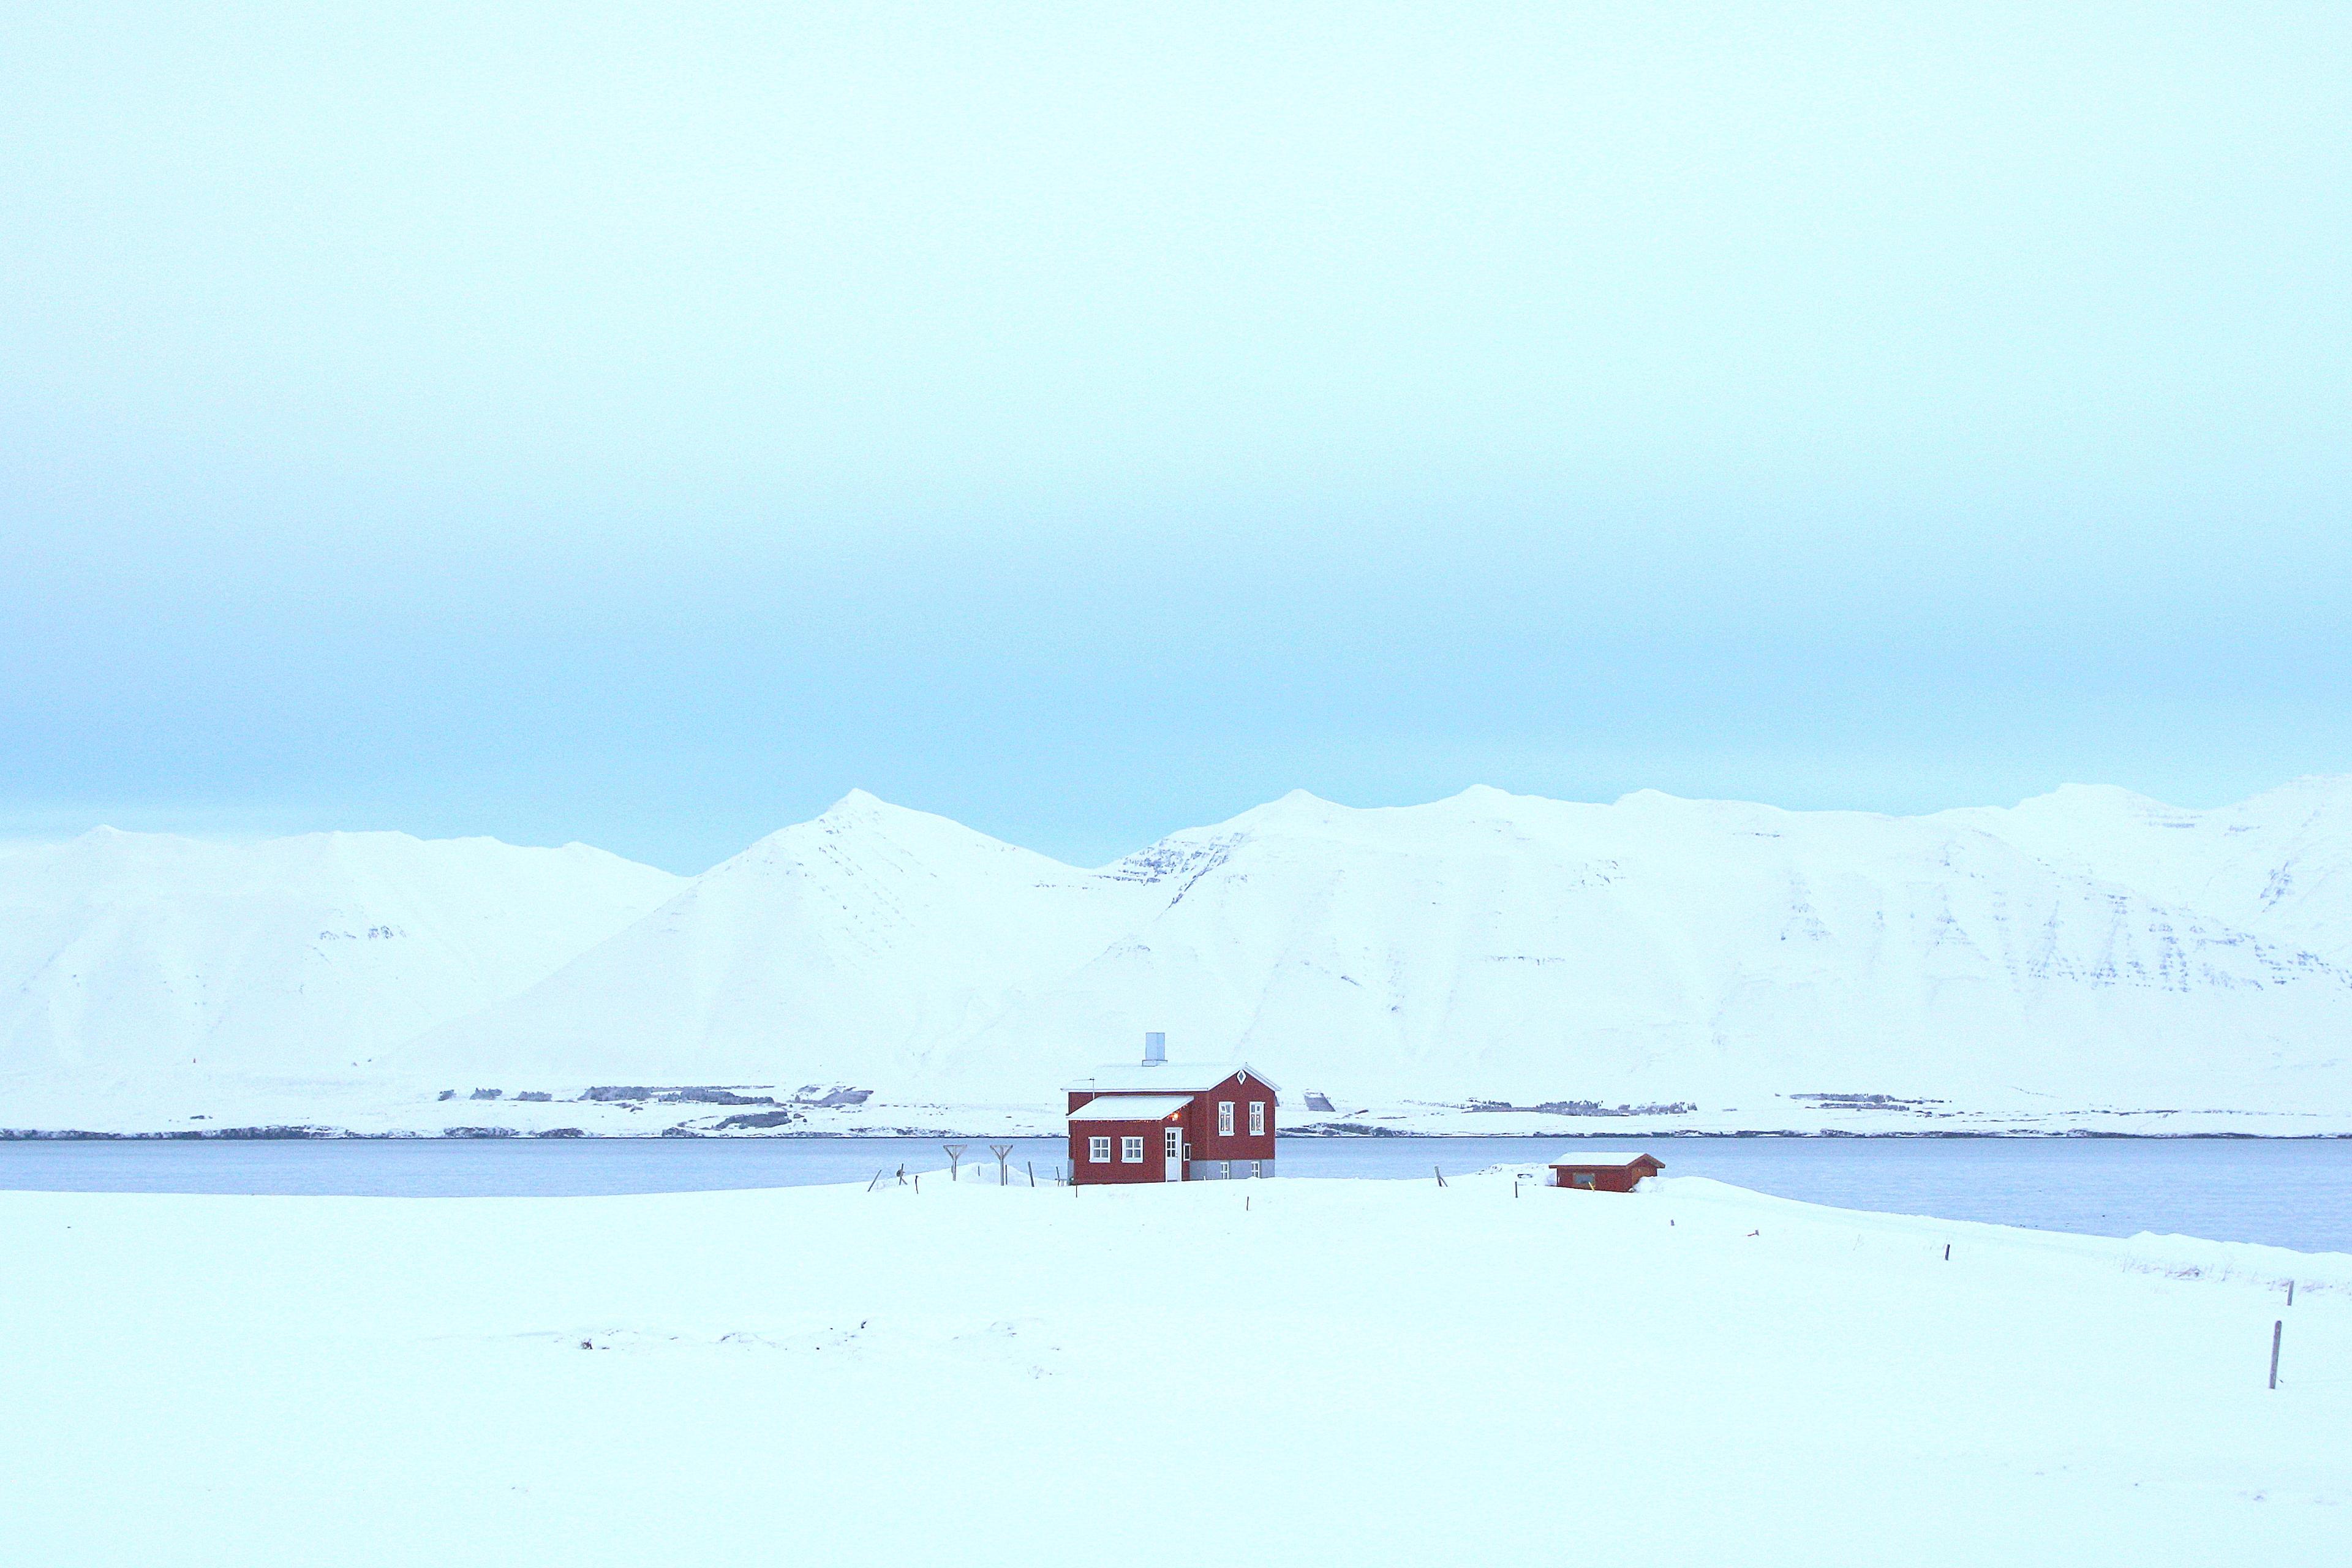 Two charming small red wooden houses nestled in a snowy landscape by the side of a serene sea fjord.